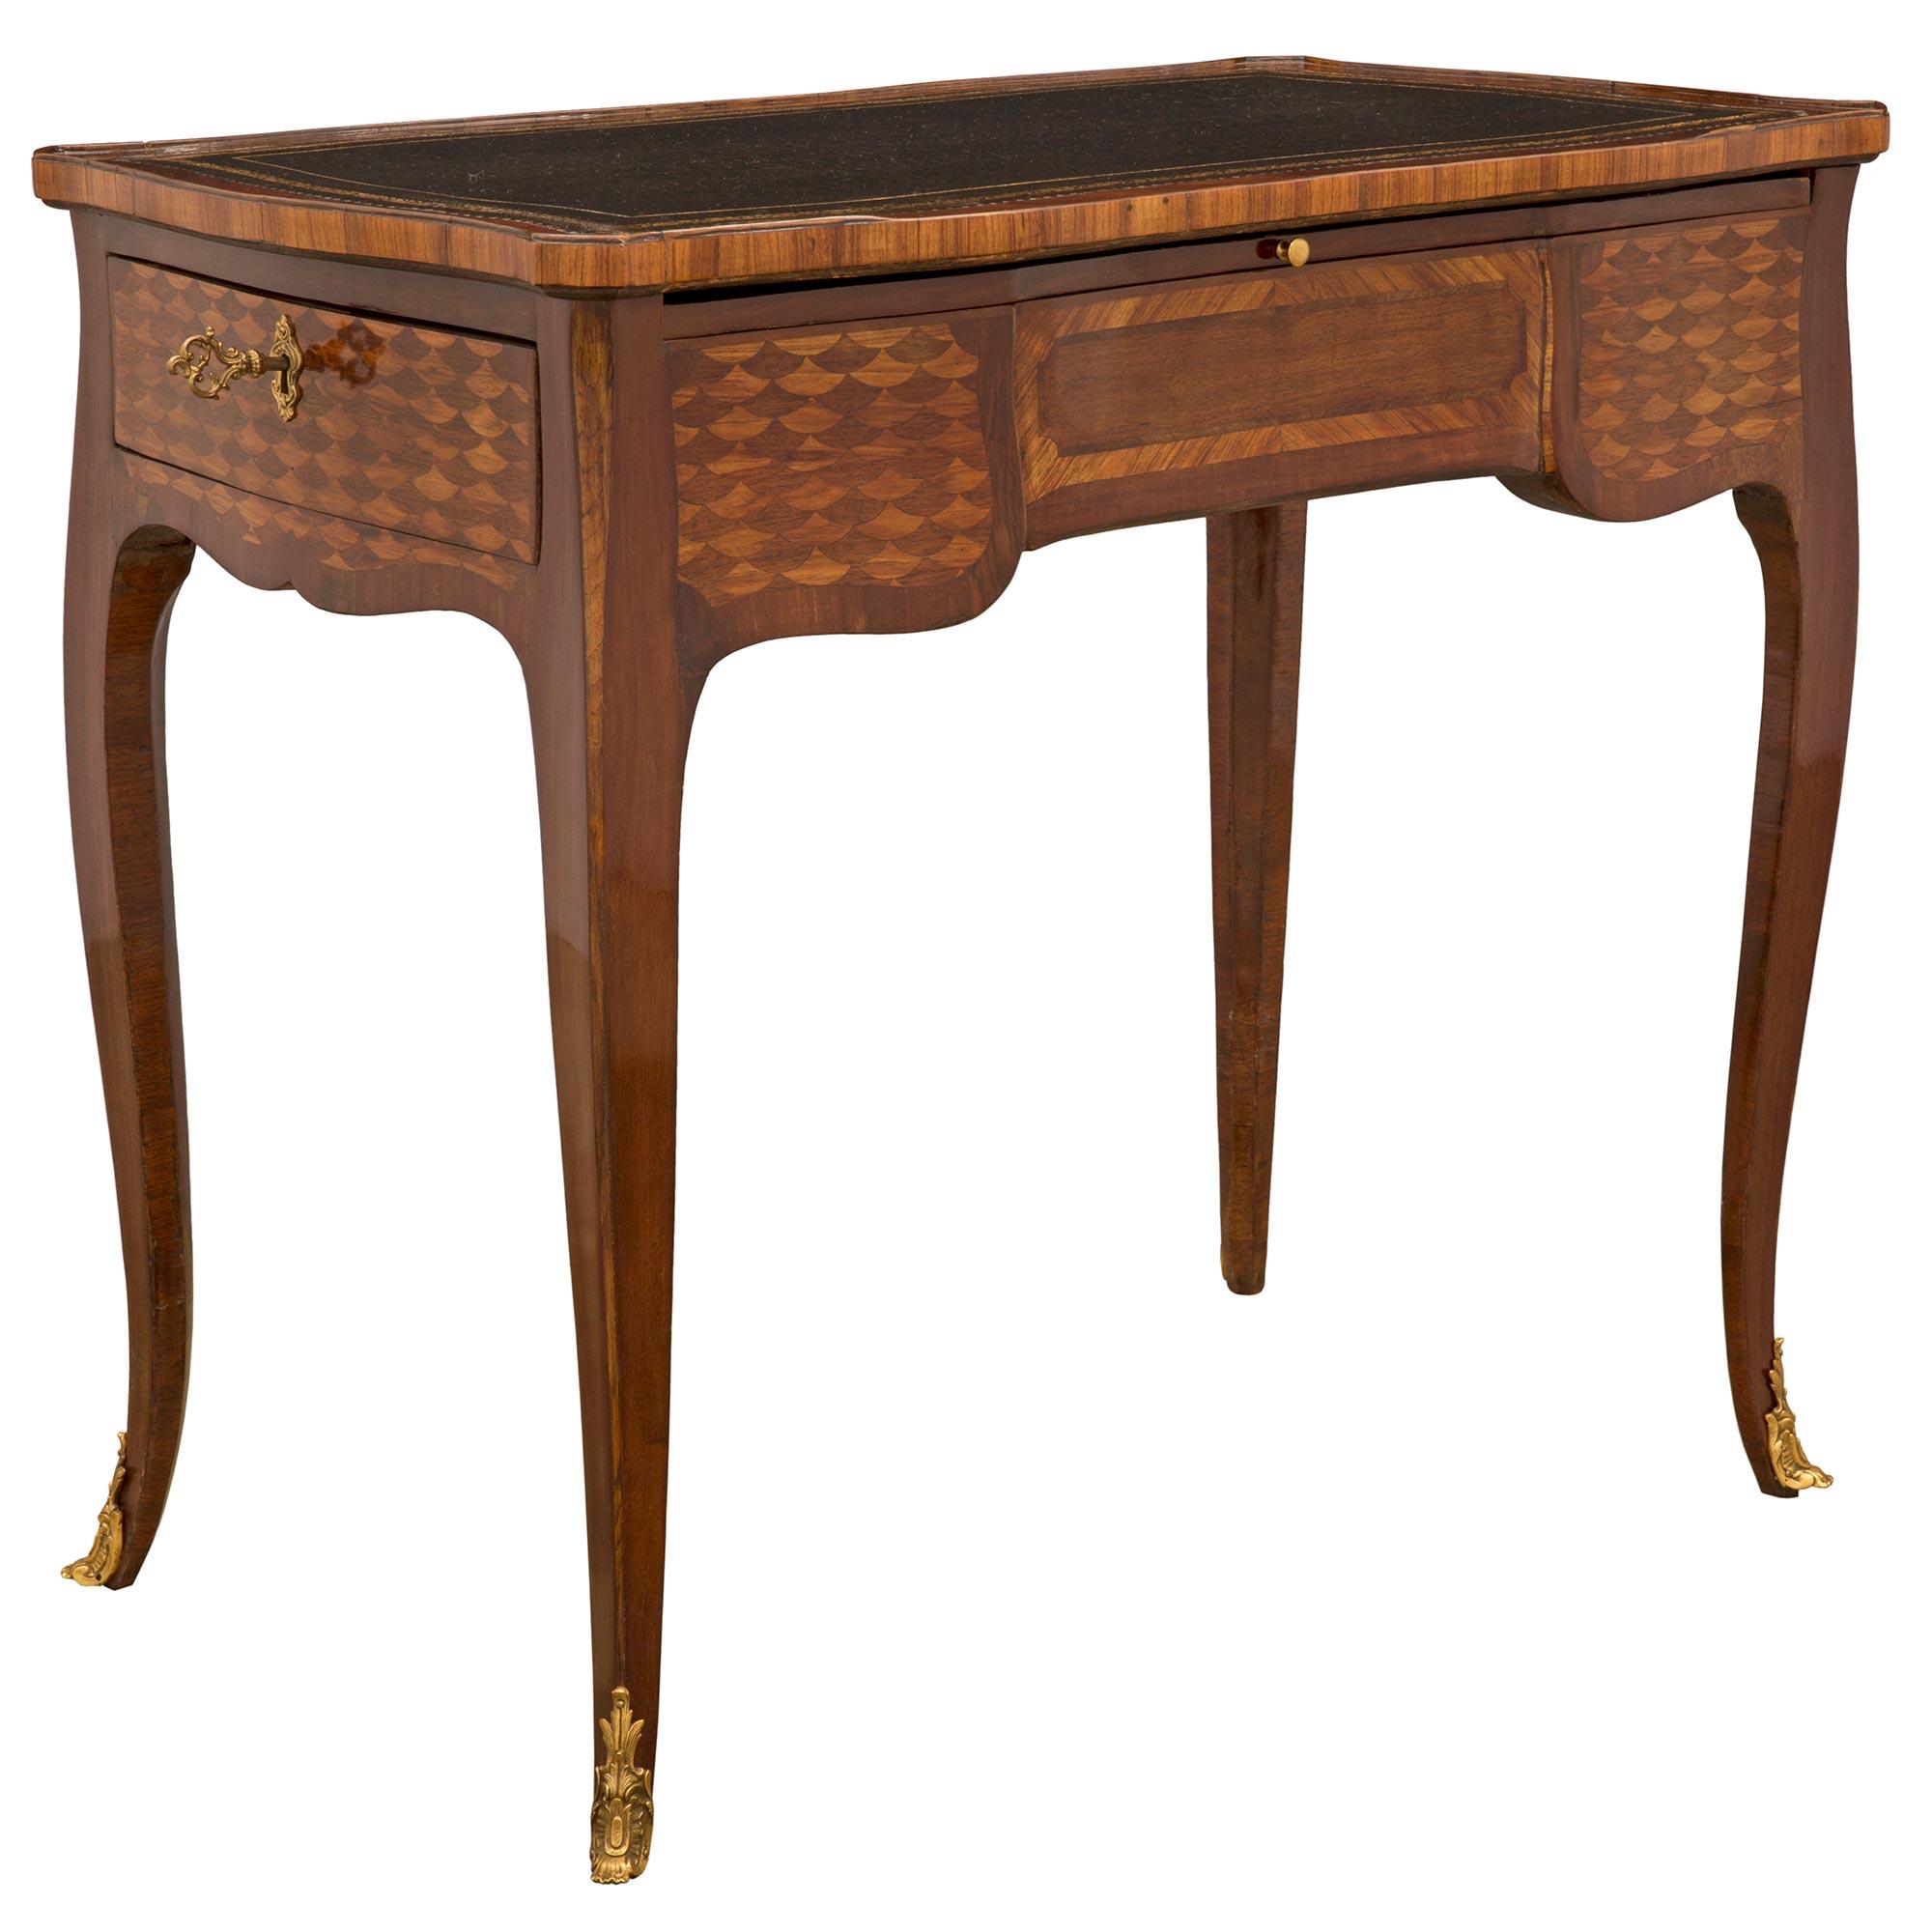 French 18th Century Louis XV Period Kingwood And Tulipwood Desk For Sale 5